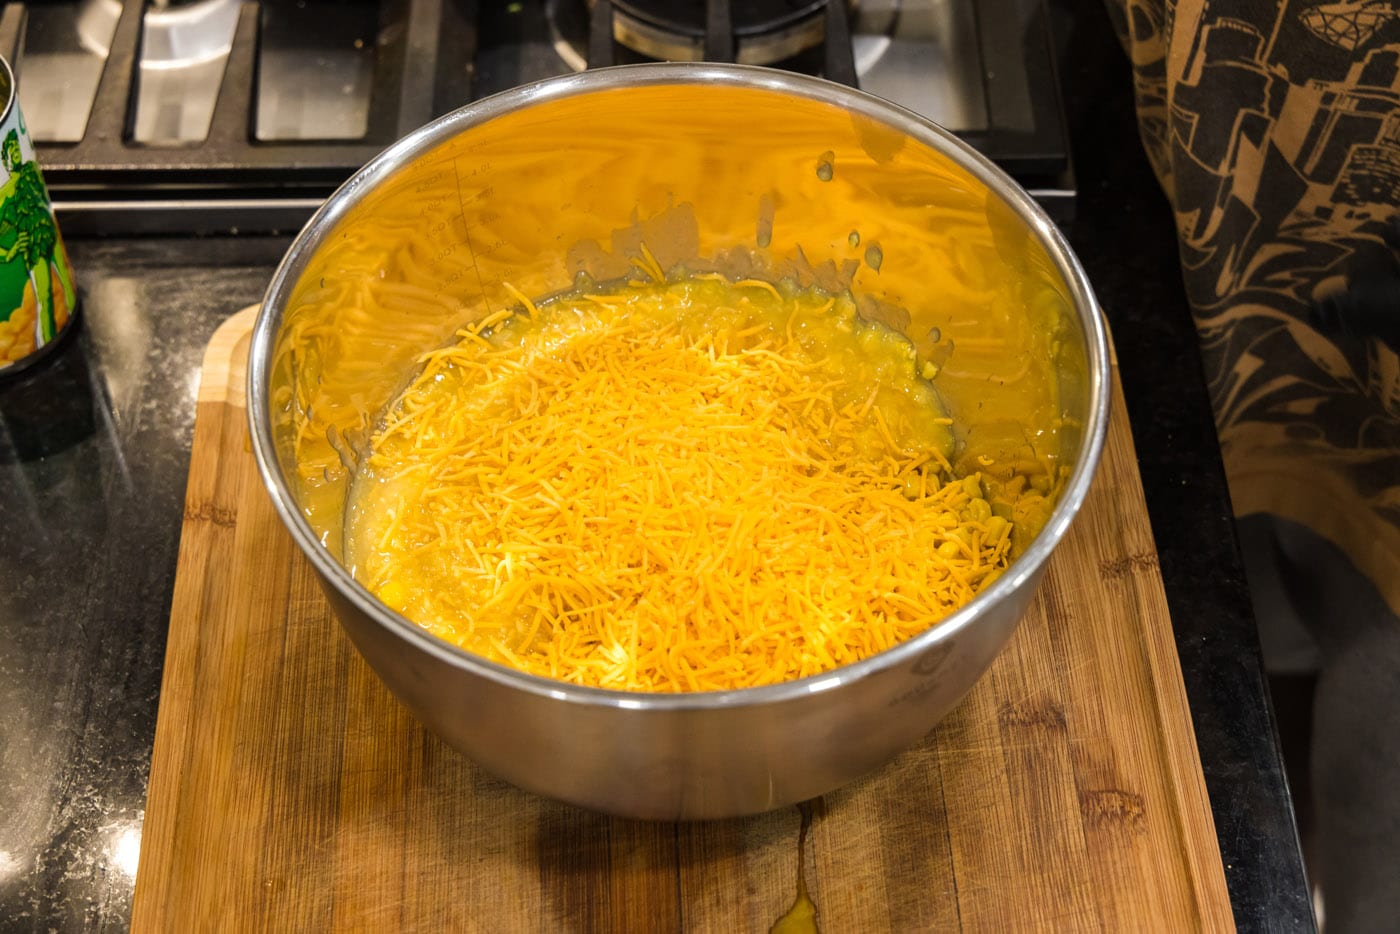 shredded cheddar cheese added to canned corn in a mixing bowl